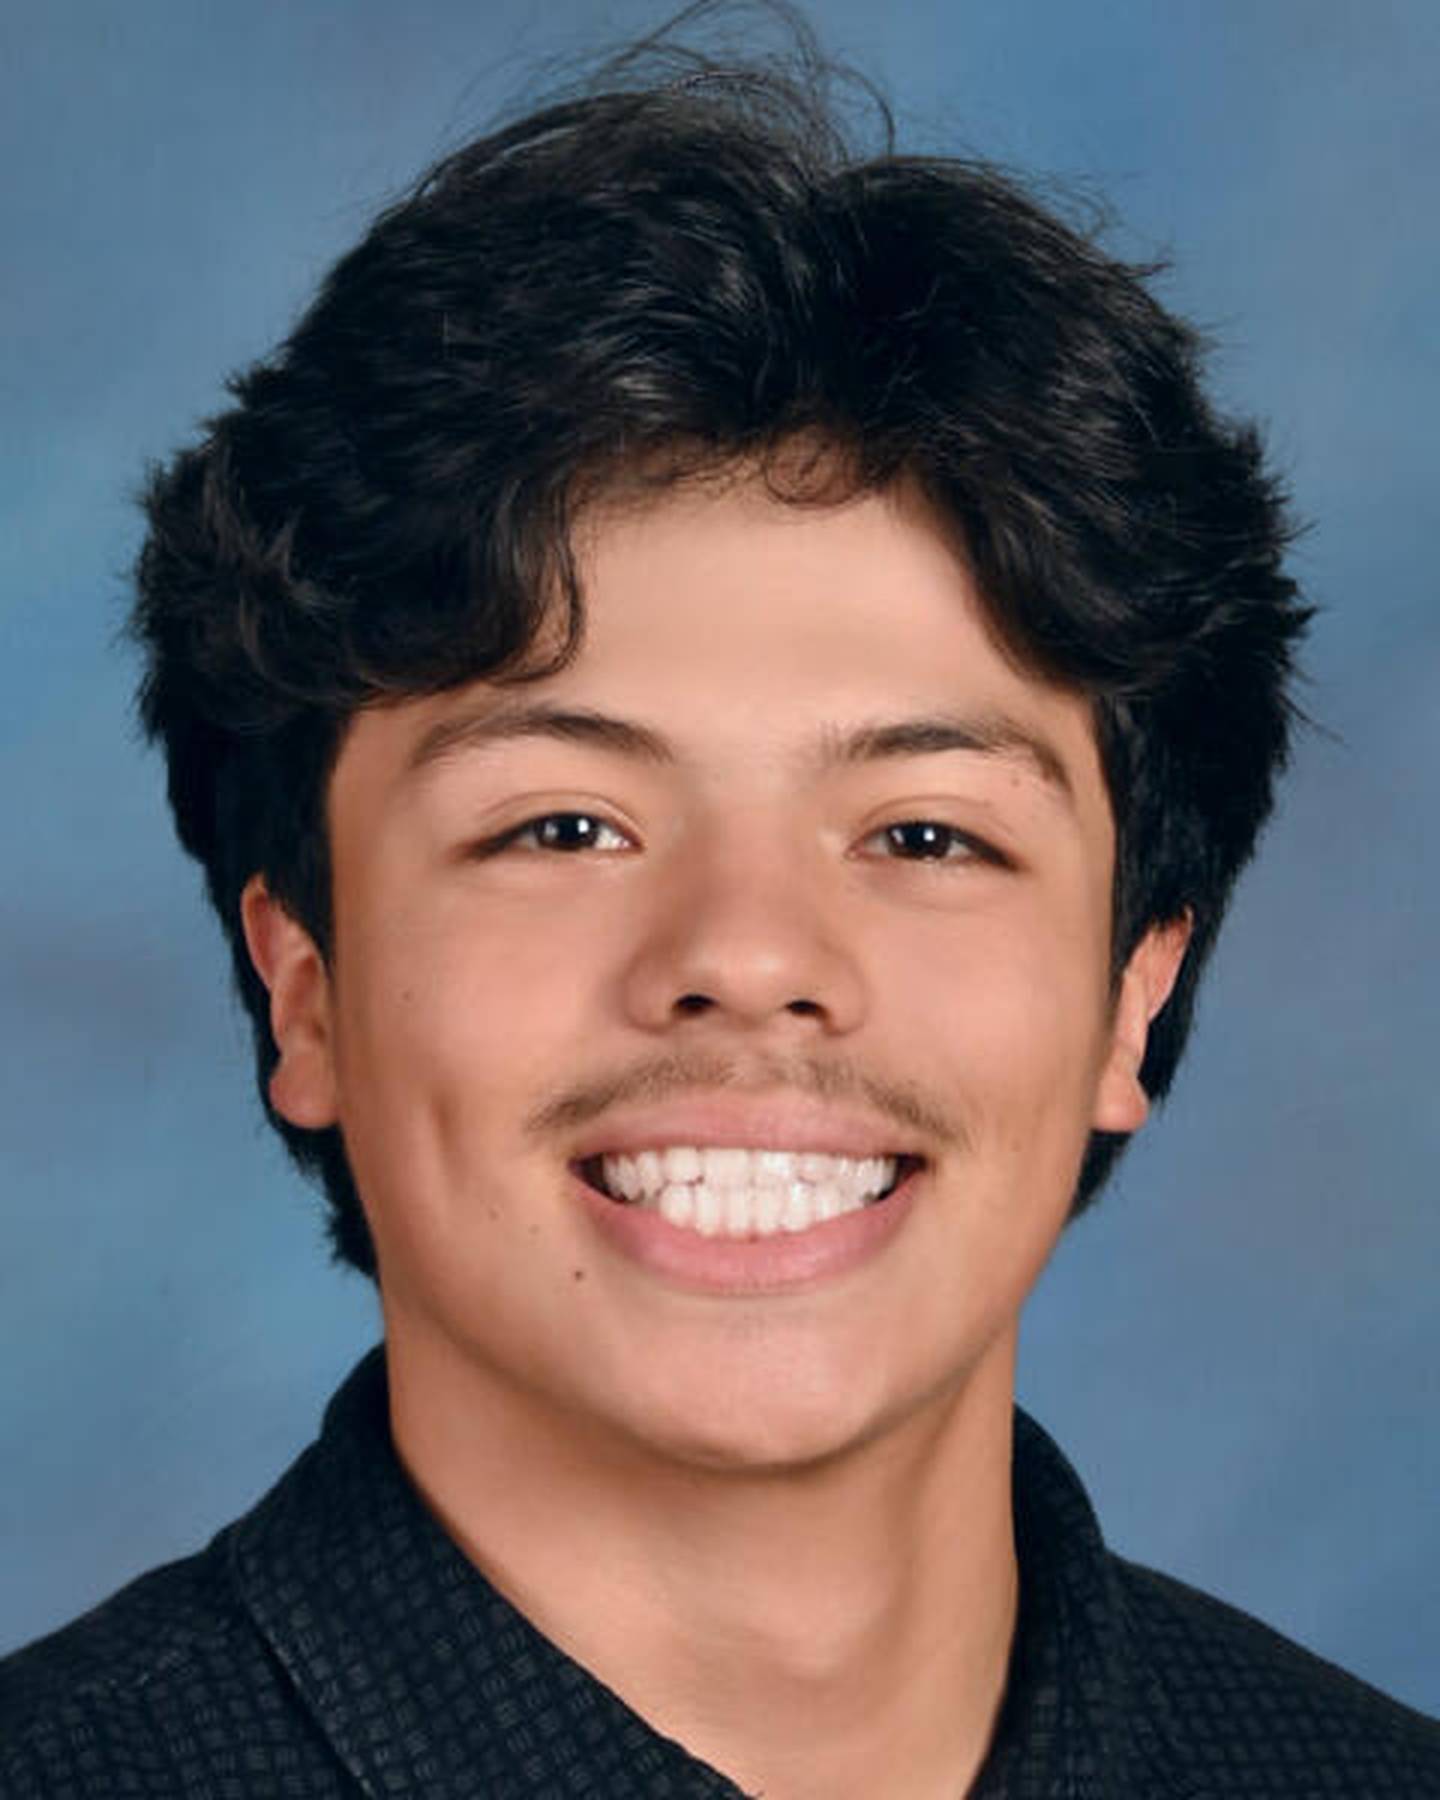 Joliet Central High School senior Rafael Gutierrez was named the 2023 Mr. J at a banquet held on April 26 at the Jacob Henry Mansion in Joliet.